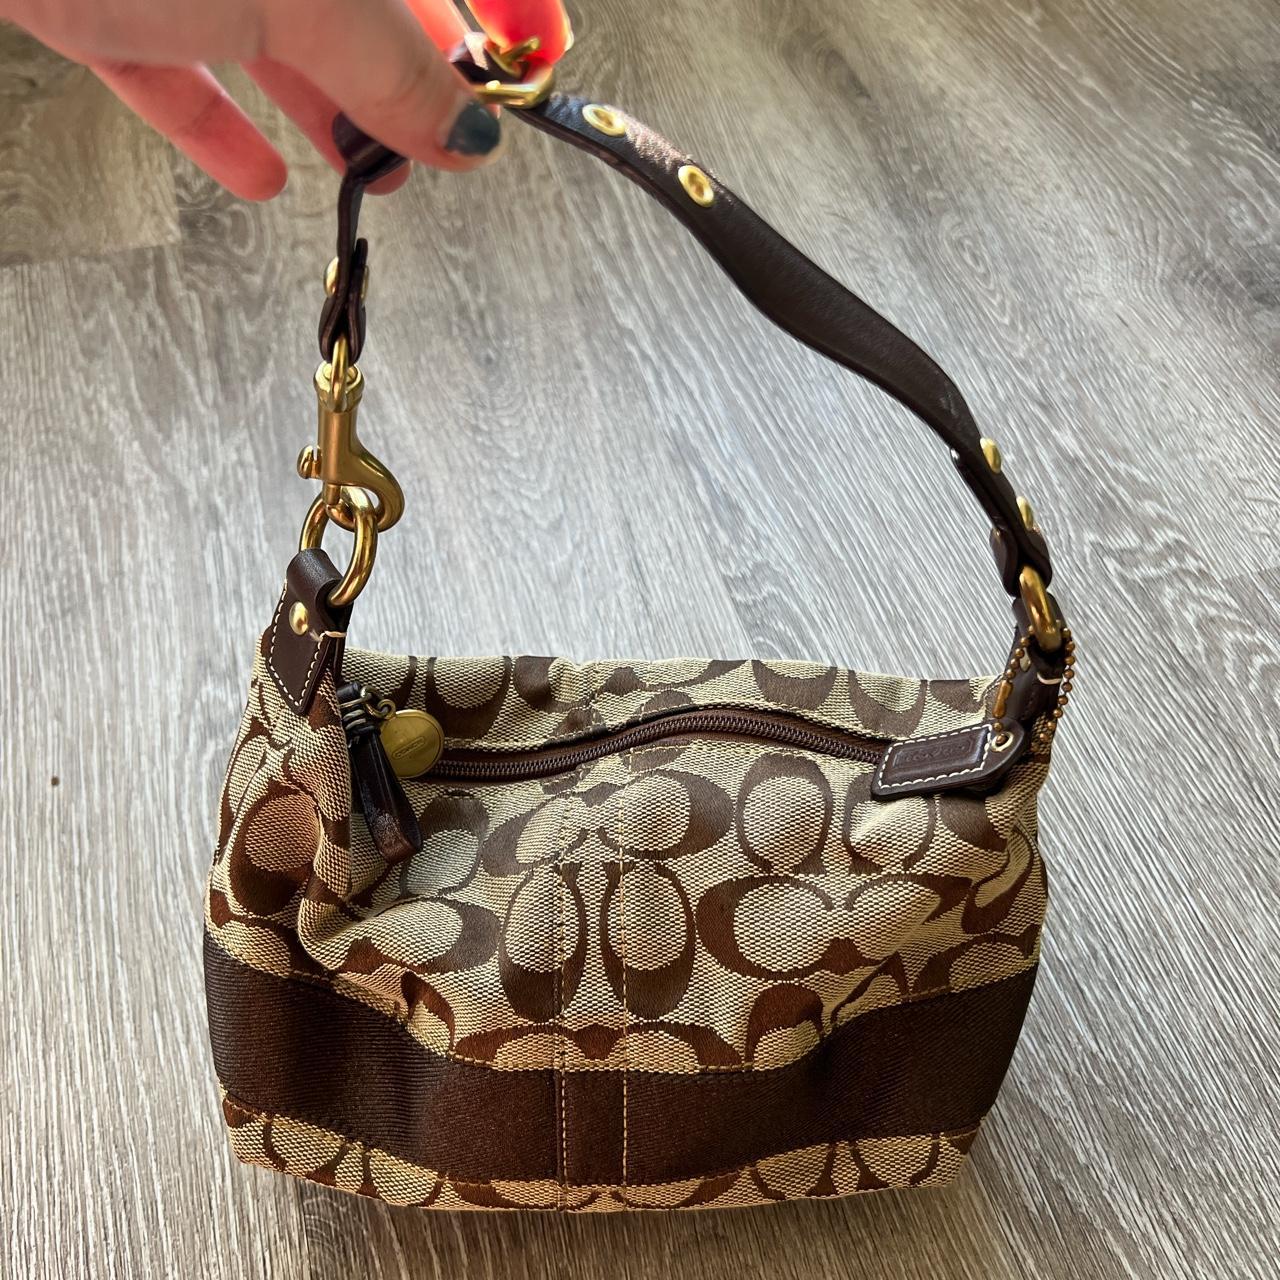 Small gold Coach purse - clothing & accessories - by owner - apparel sale -  craigslist